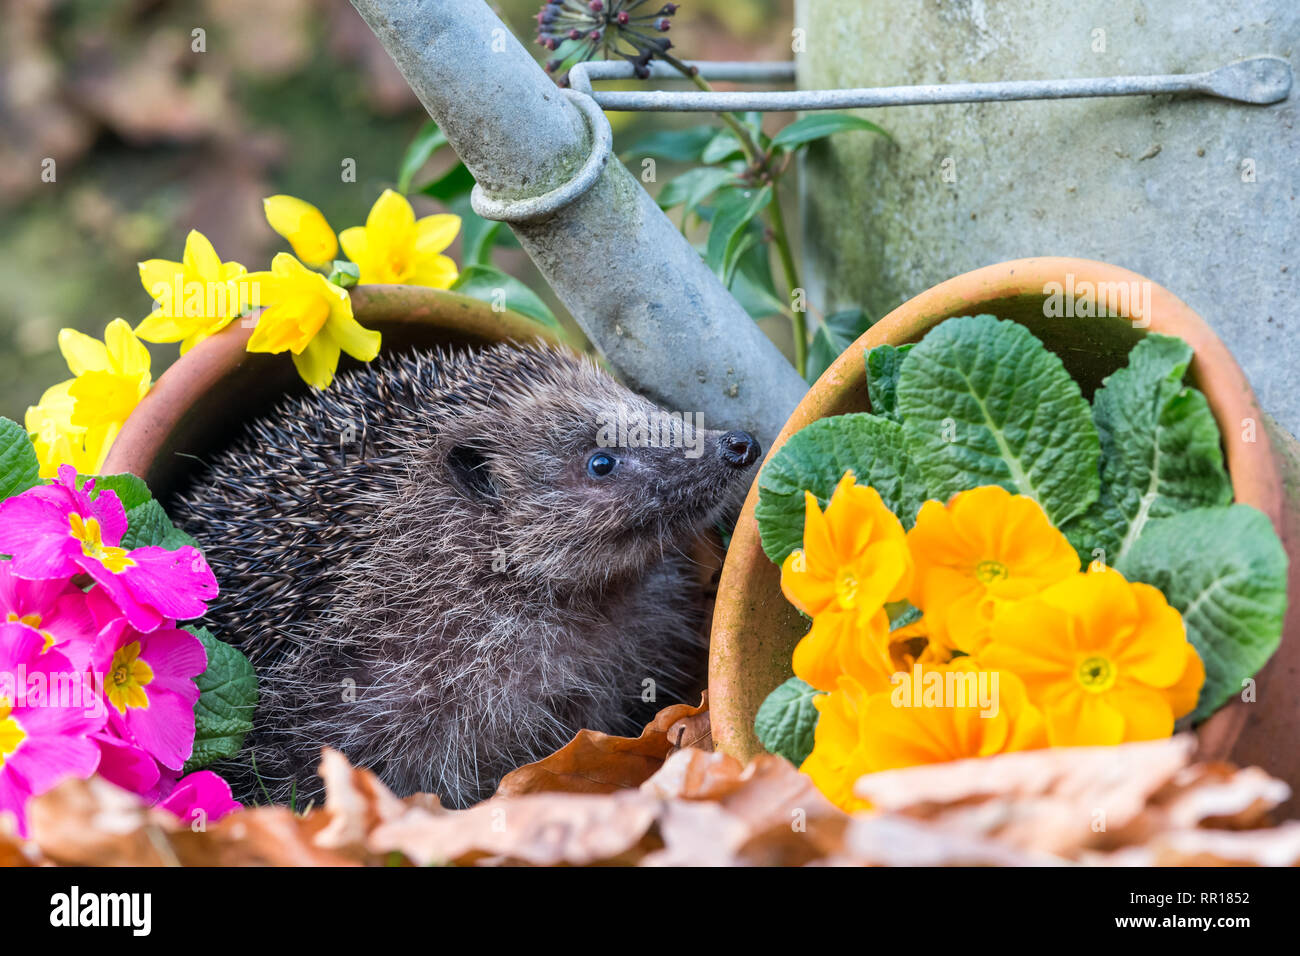 Hedgehog, Scientific name: Erinaceus Europaeus, in Springtime in natural garden habitat with colourful Spring flowers and flower pots. Landscape Stock Photo